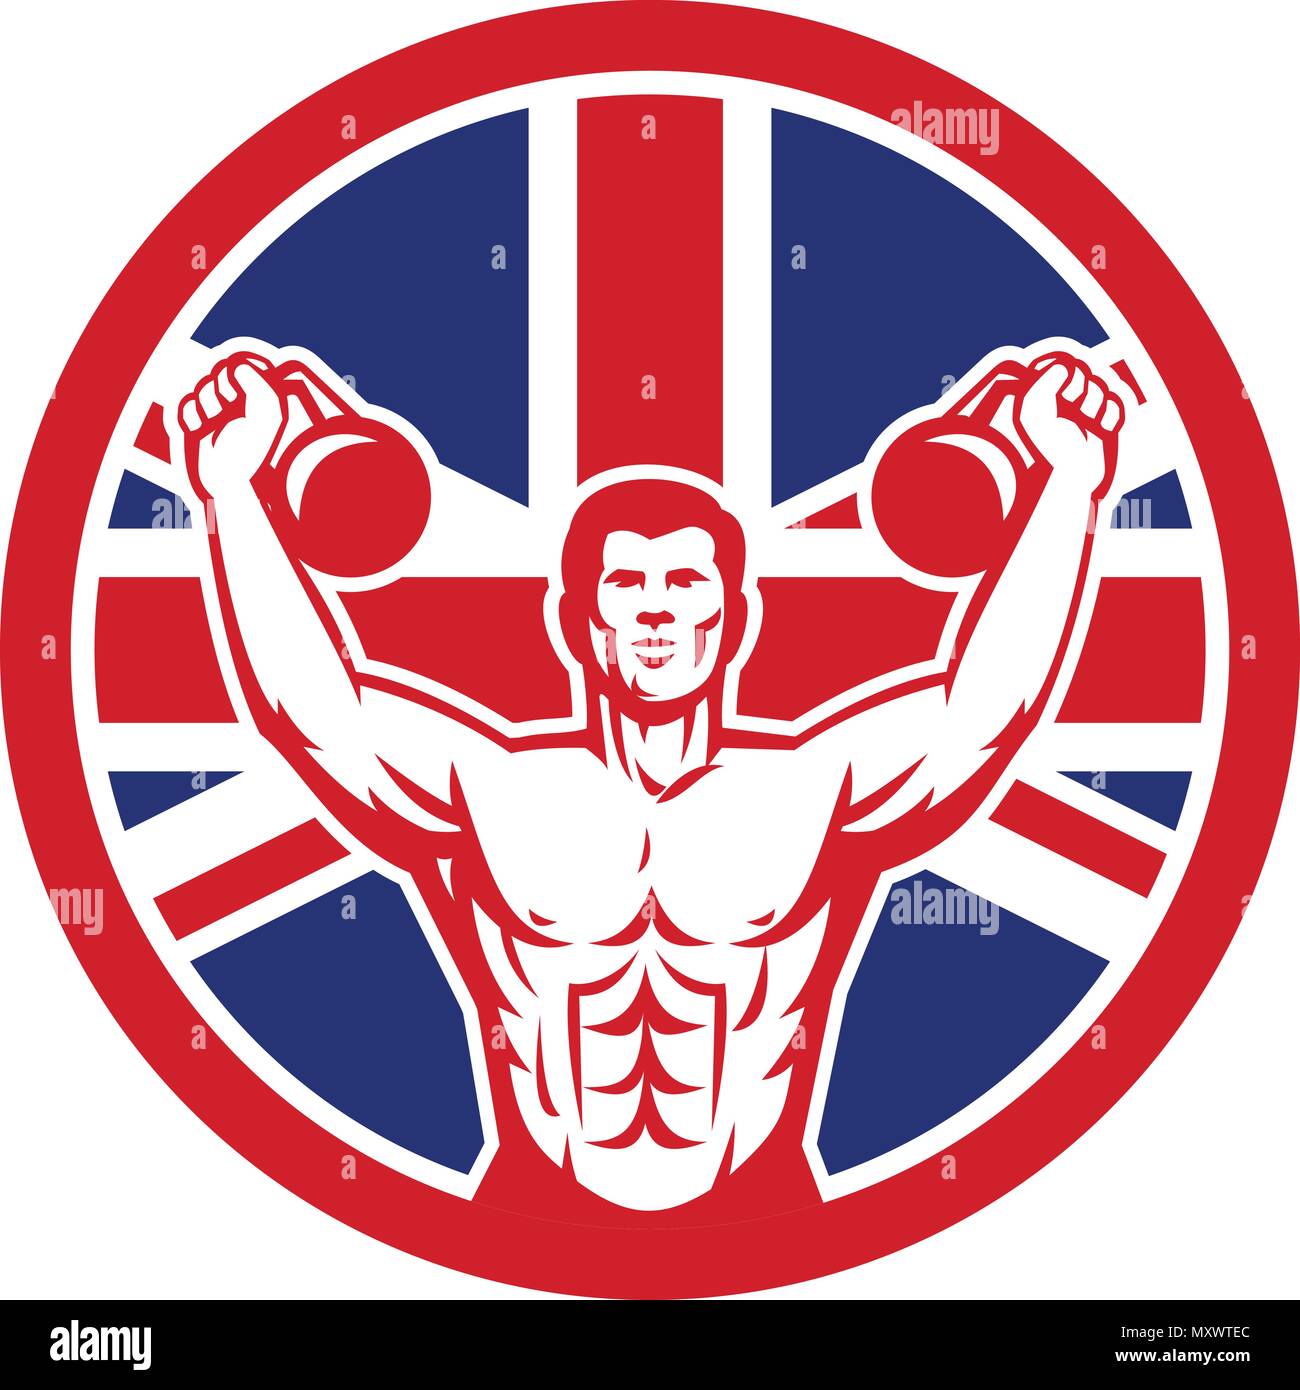 Icon retro style illustration of a British physical fitness buff training with kettlebell  and United Kingdom UK, Great Britain Union Jack flag set in Stock Vector